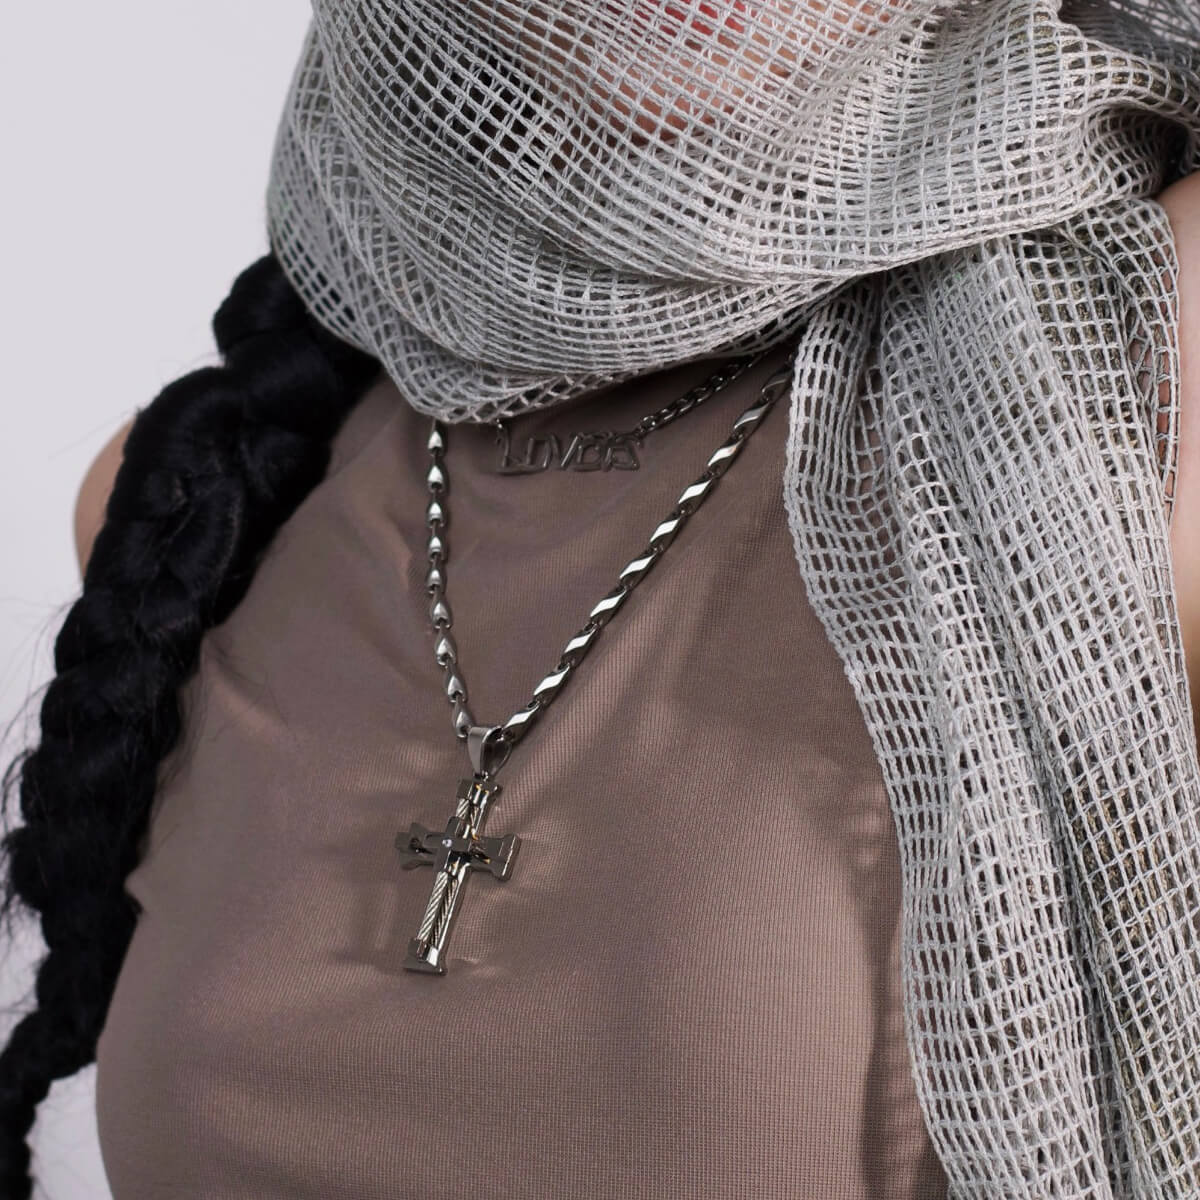 Hip-Hop Style Cross Necklace | Buy at Khanie